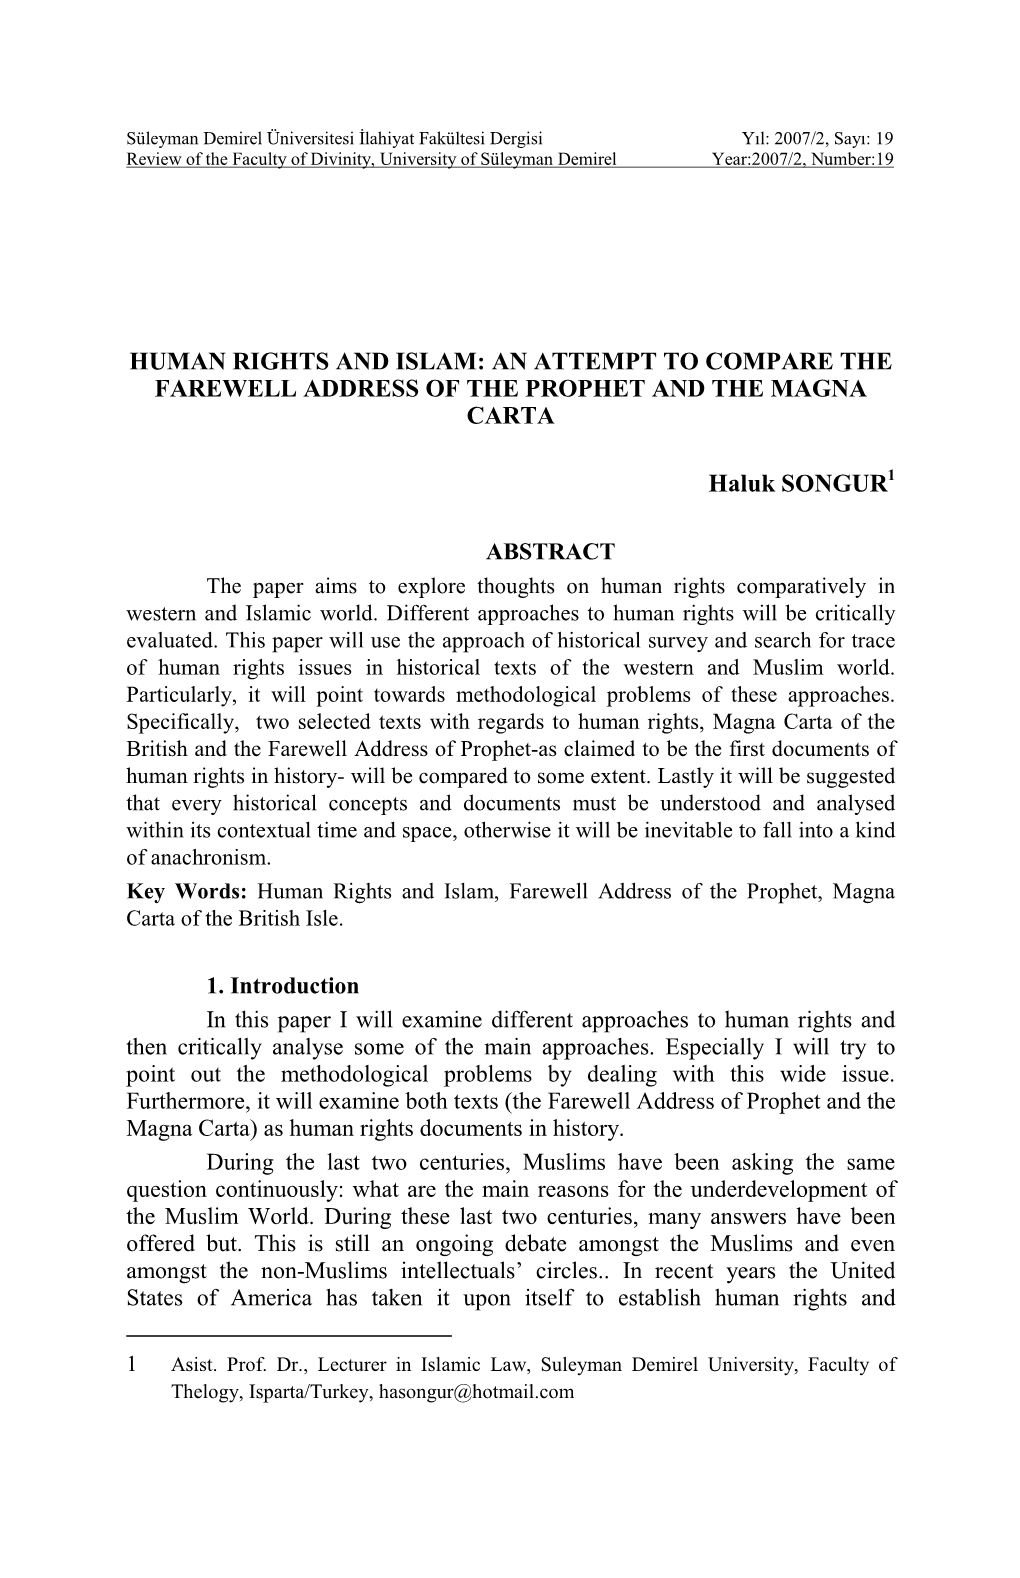 Human Rights and Islam: an Attempt to Compare the Farewell Address of the Prophet and the Magna Carta